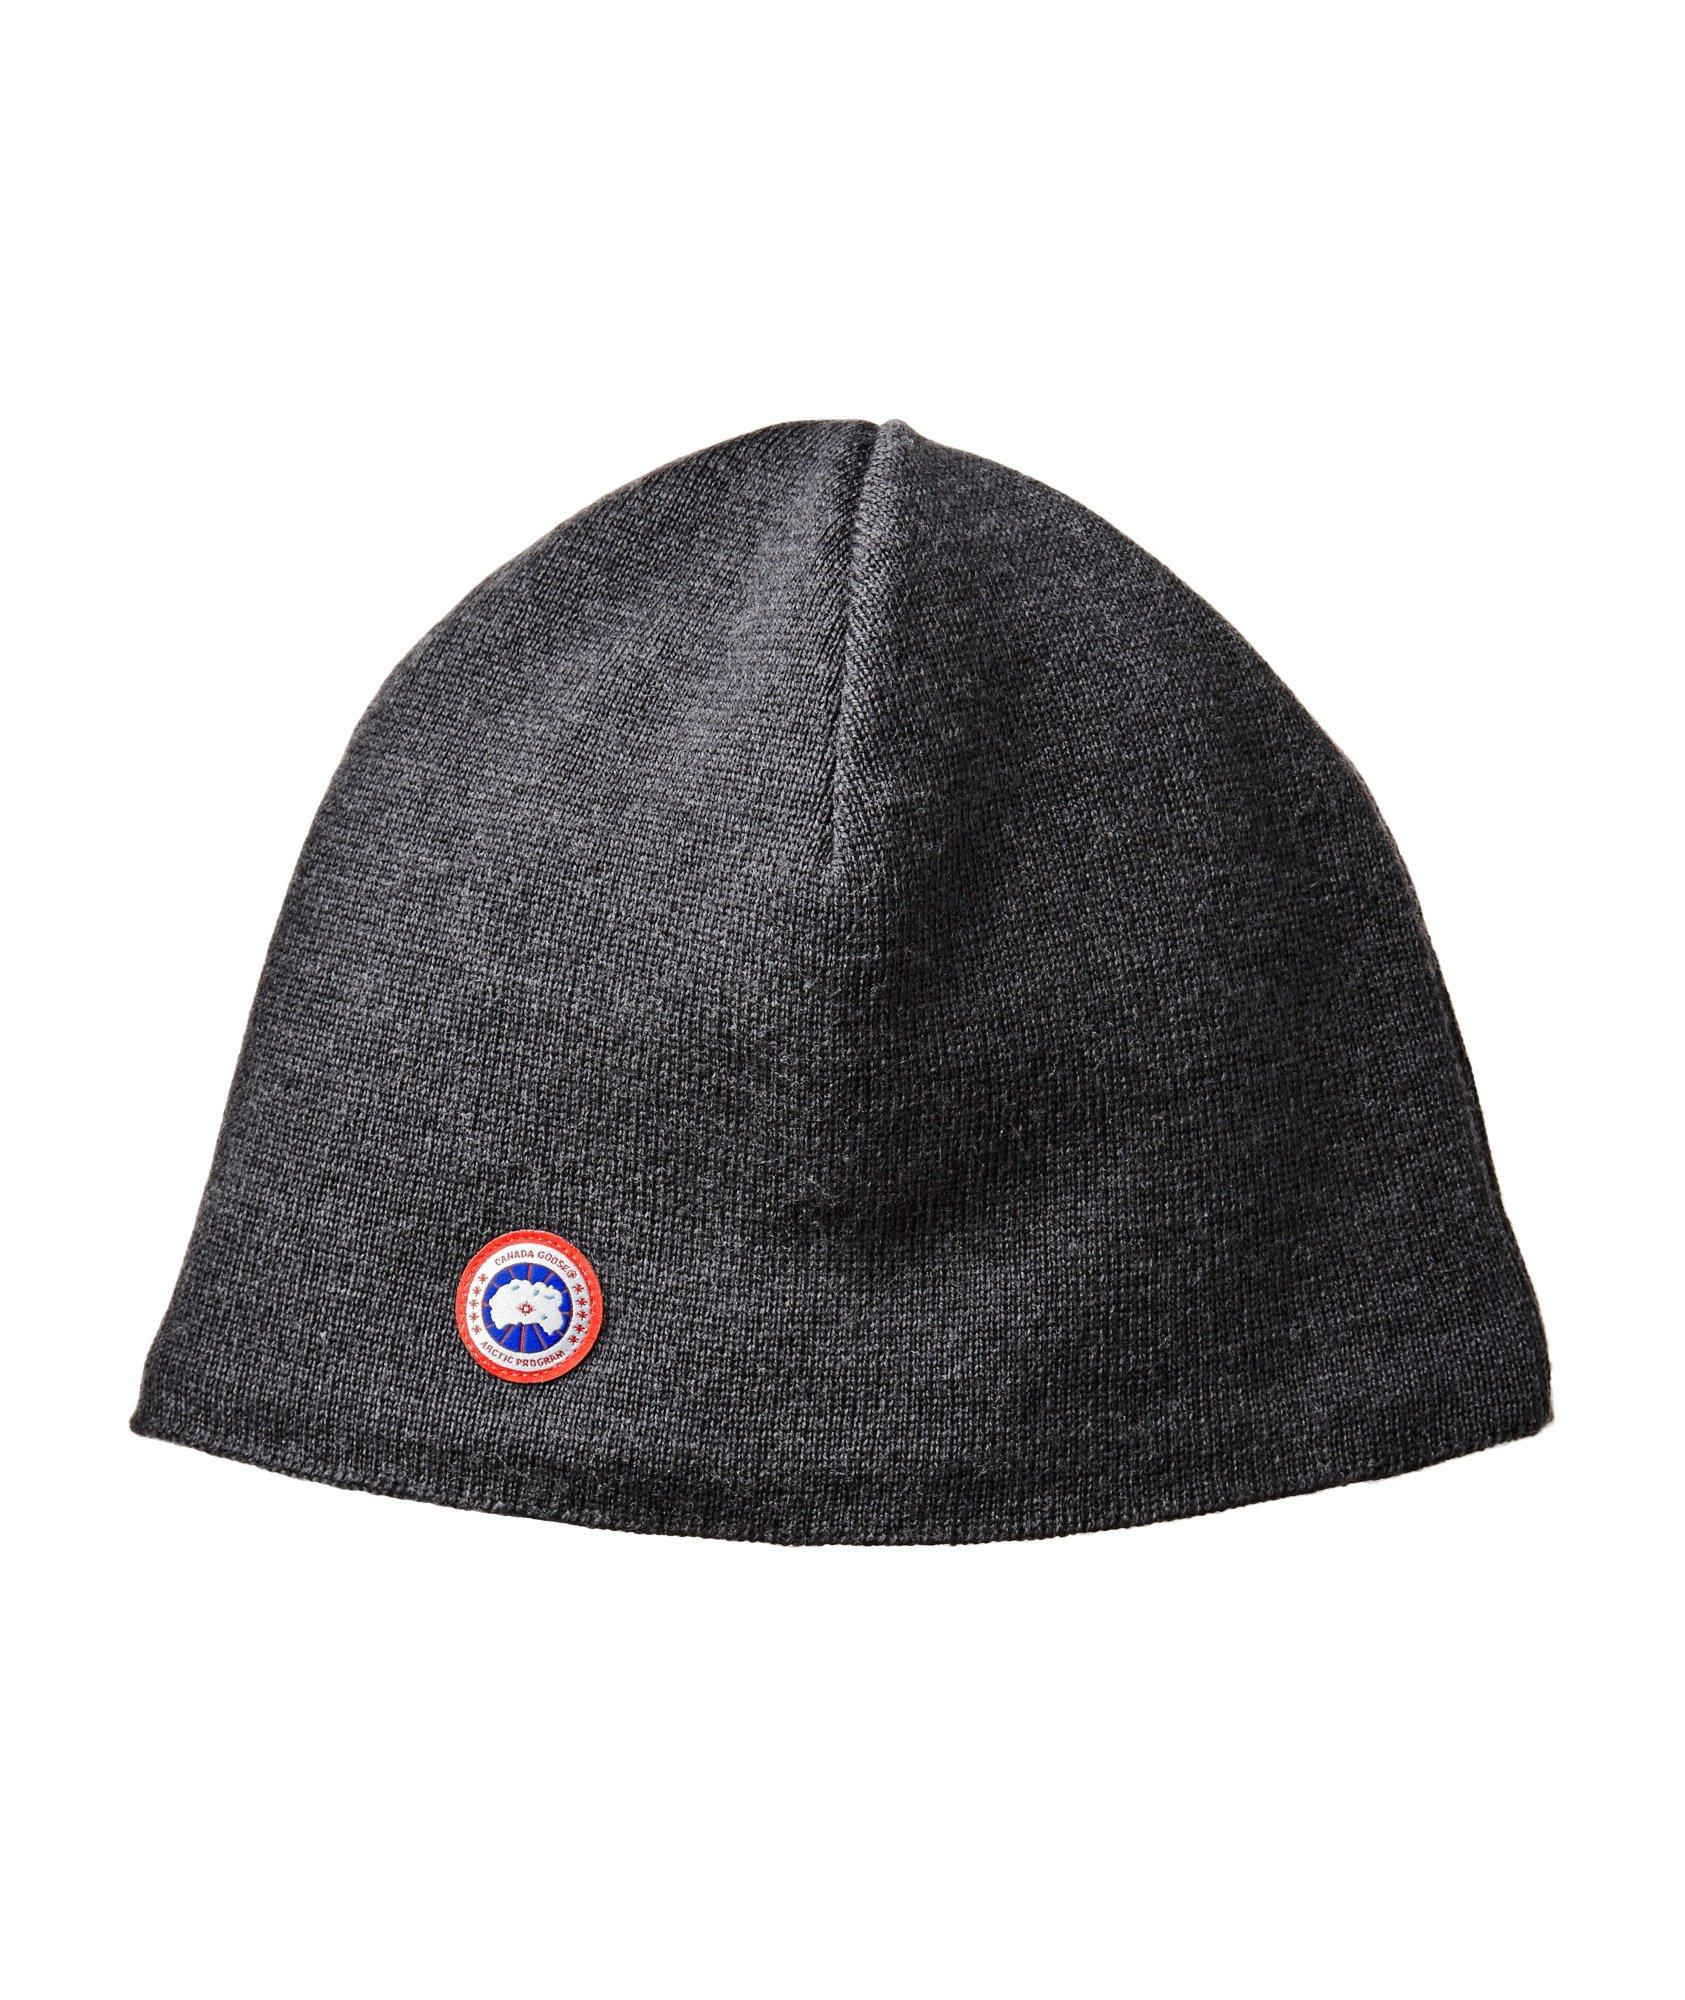 CG DKGRY WOOL TOQUE image 0